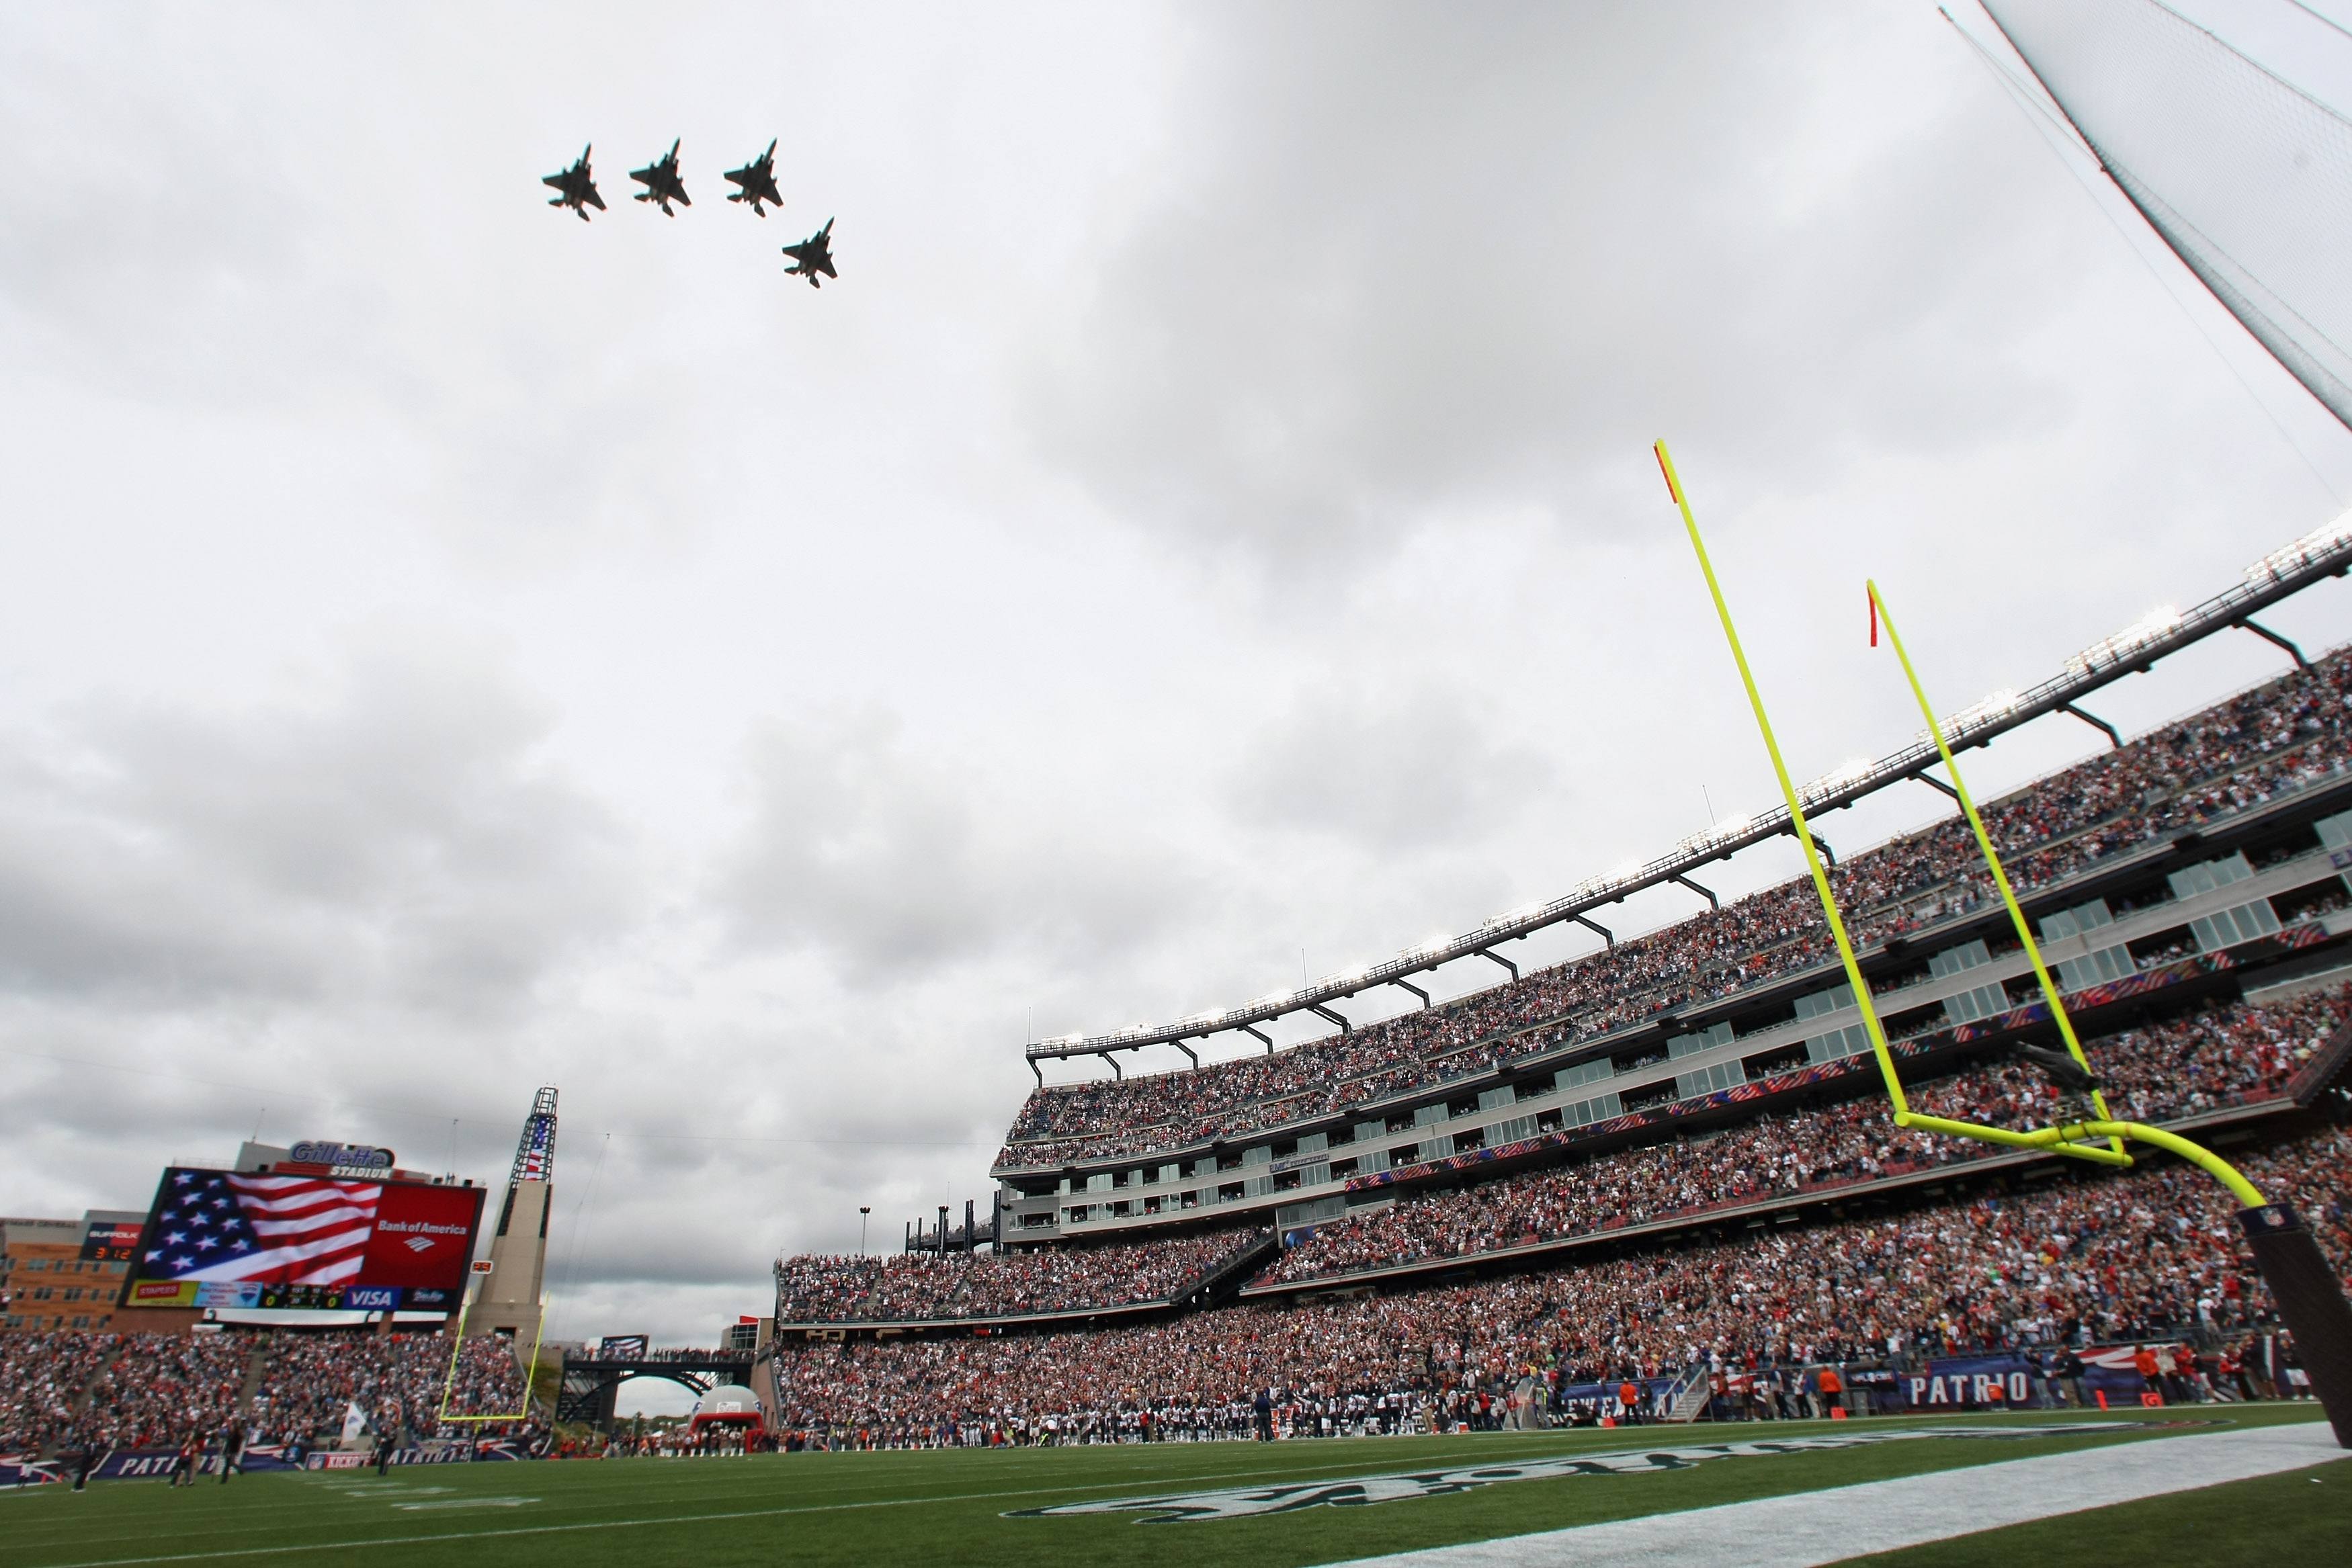 Jets flying over football field